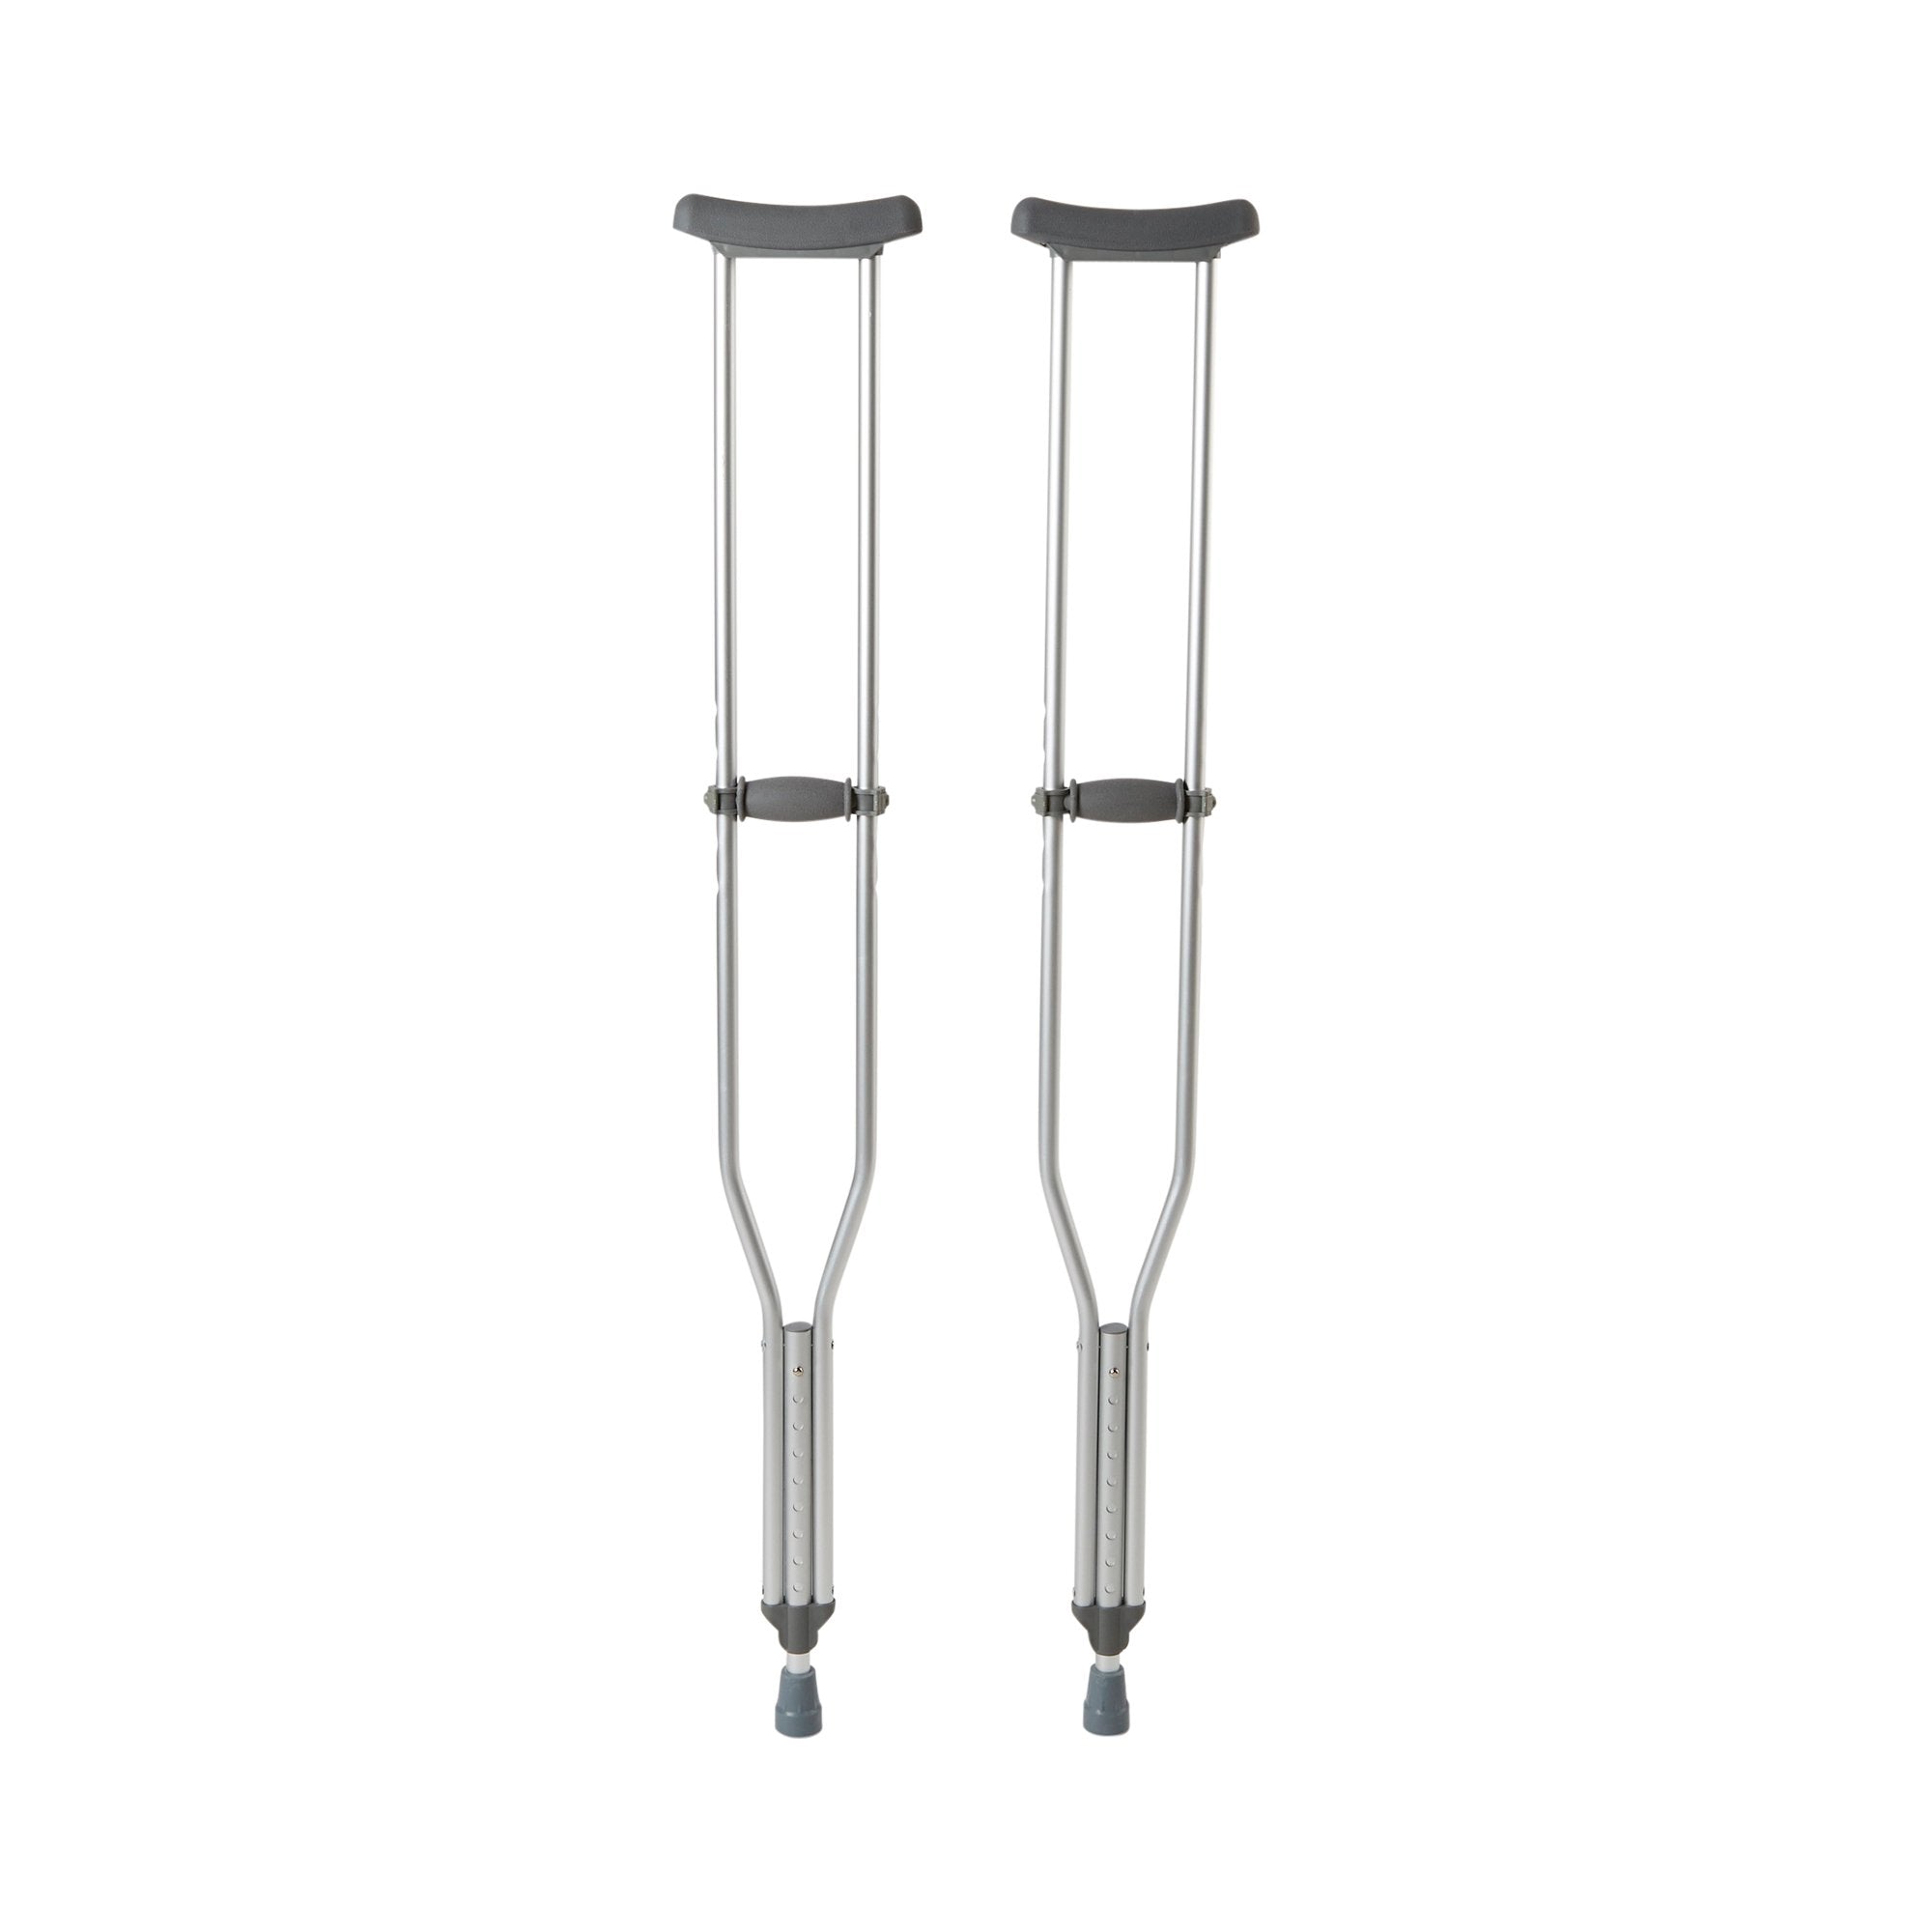 Underarm Crutches McKesson Aluminum Frame Tall Adult 350 lbs. Weight Capacity Push Button Adjustment